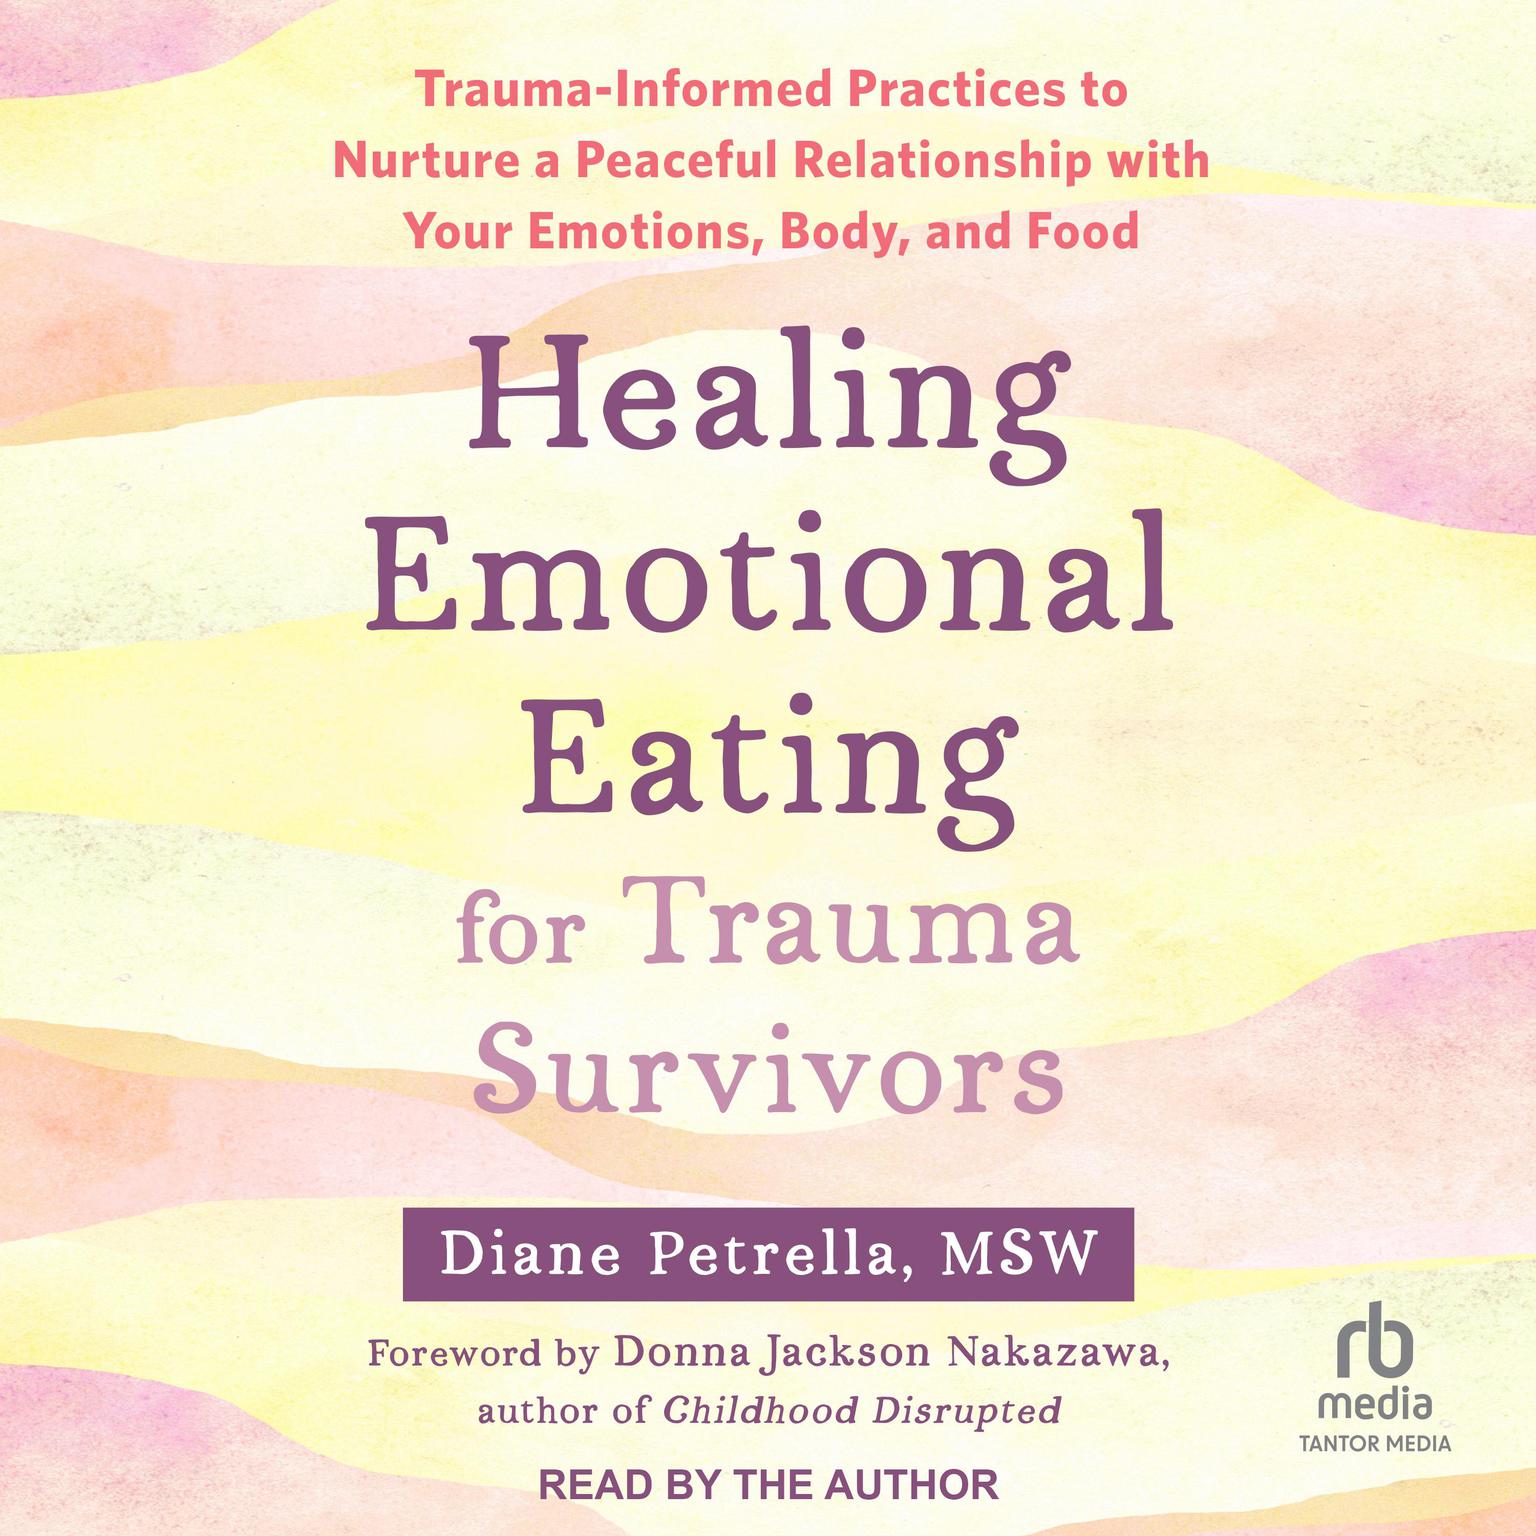 Healing Emotional Eating for Trauma Survivors: Trauma-Informed Practices to Nurture a Peaceful Relationship with Your Emotions, Body, and Food Audiobook, by Diane Petrella, MSW